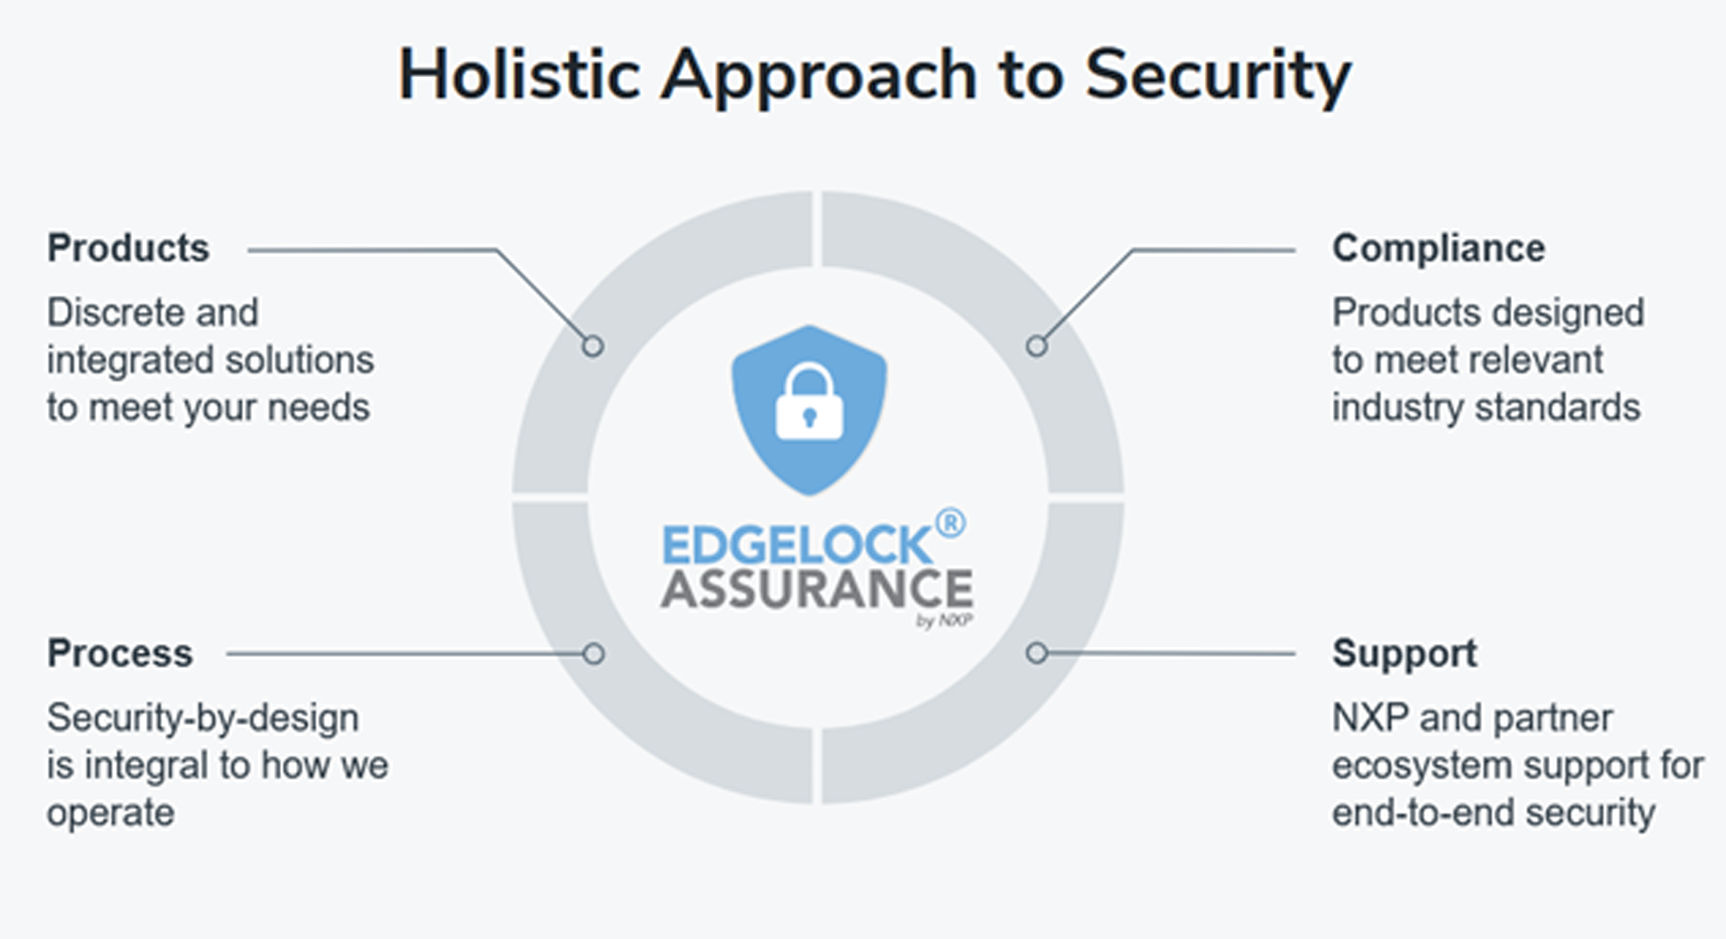 Holistic approach to security